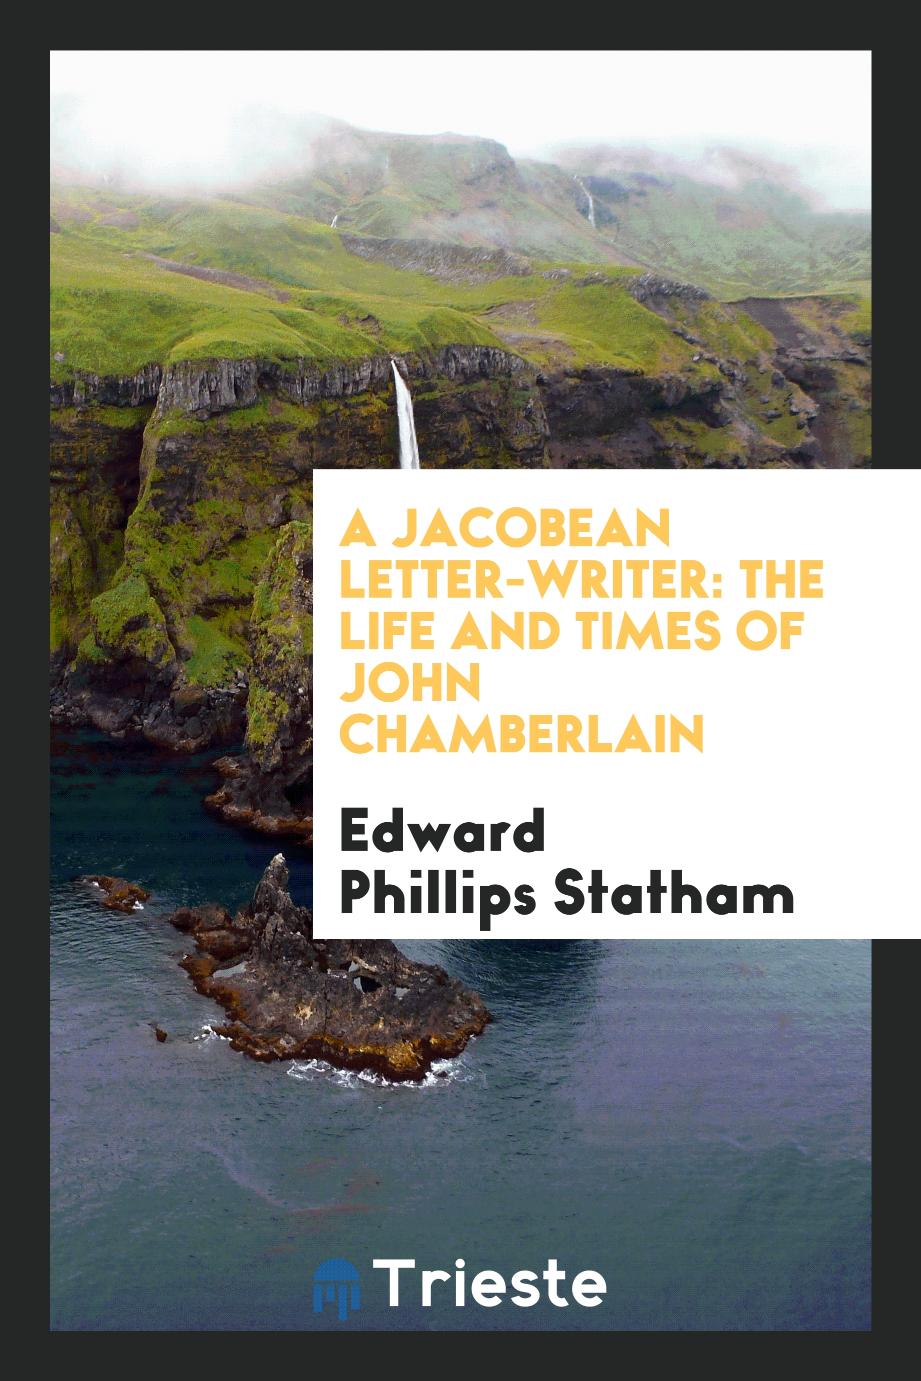 A Jacobean letter-writer: the life and times of John Chamberlain